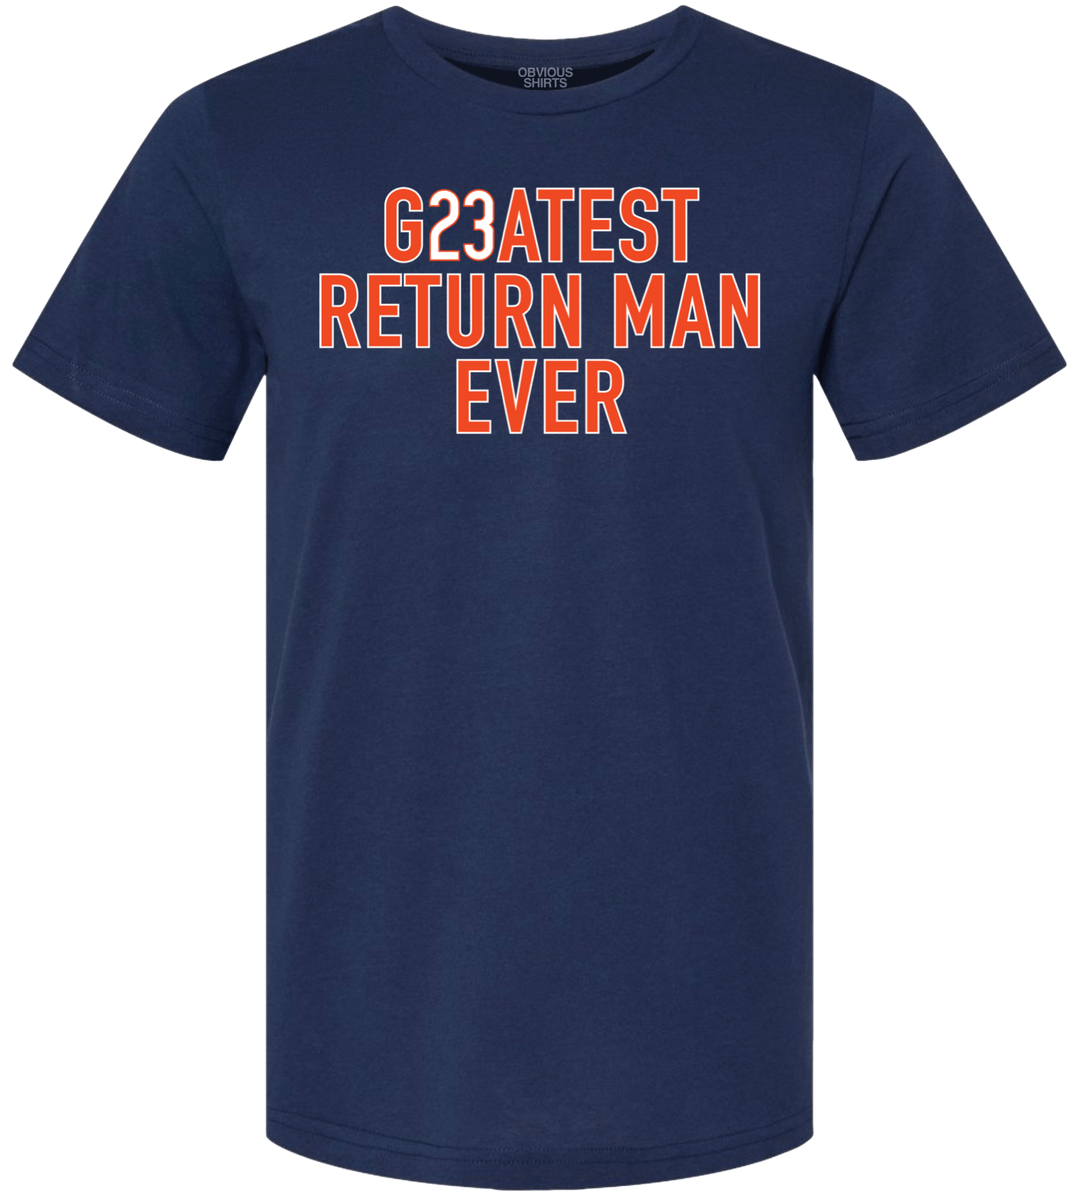 GREATEST RETURN MAN EVER. - OBVIOUS SHIRTS